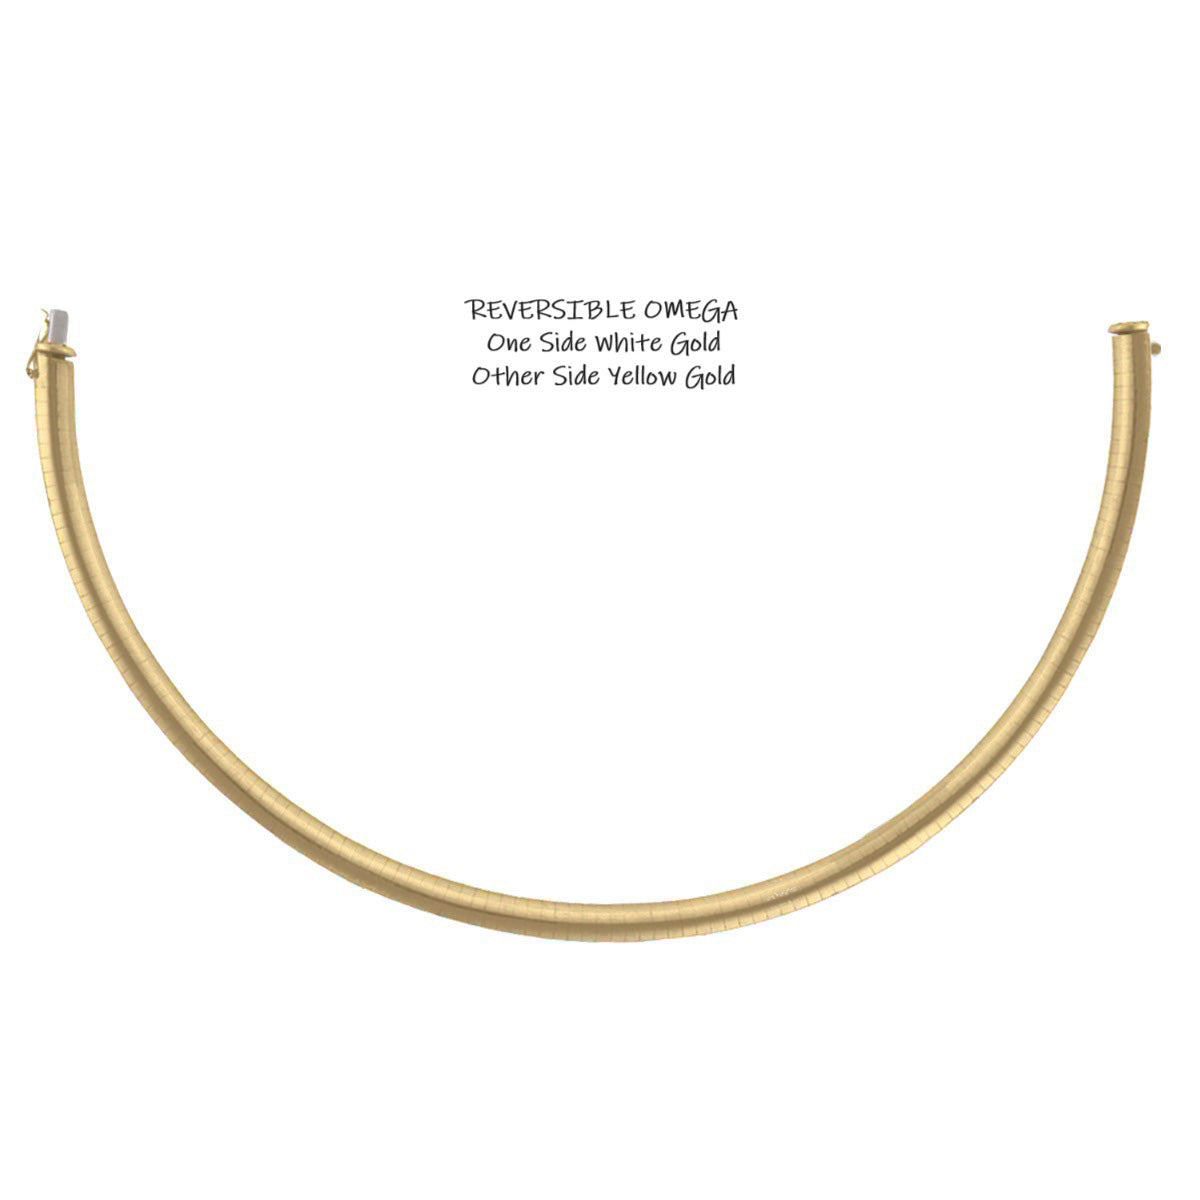 COMG02, Gold Omega Necklace, Two Tone